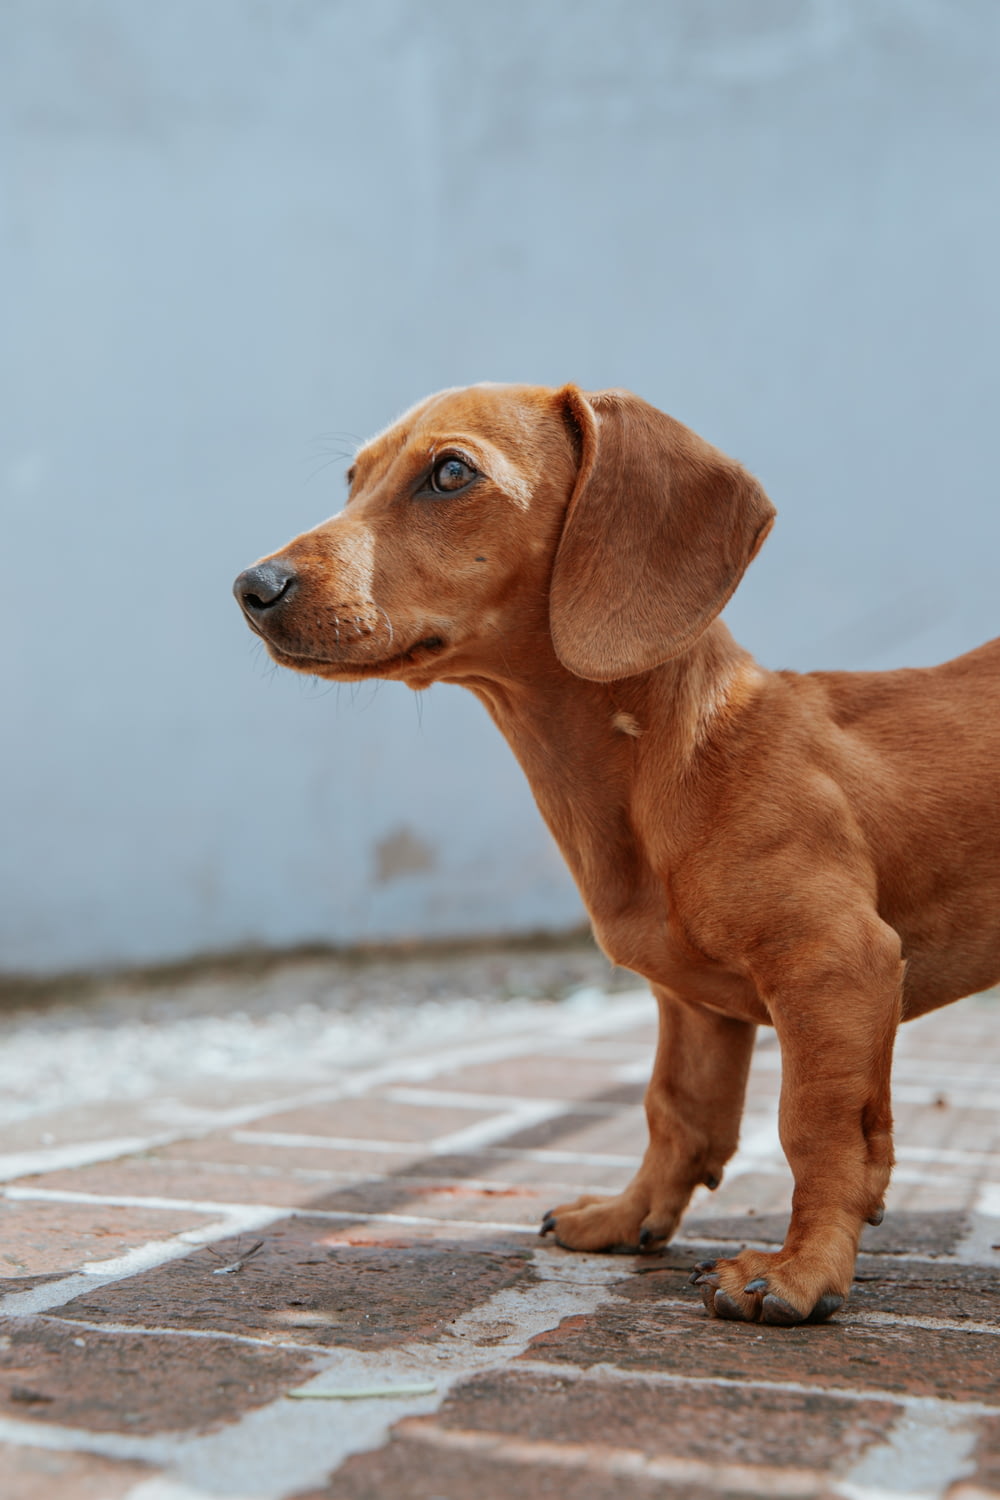 a small brown dog standing on top of a tiled floor